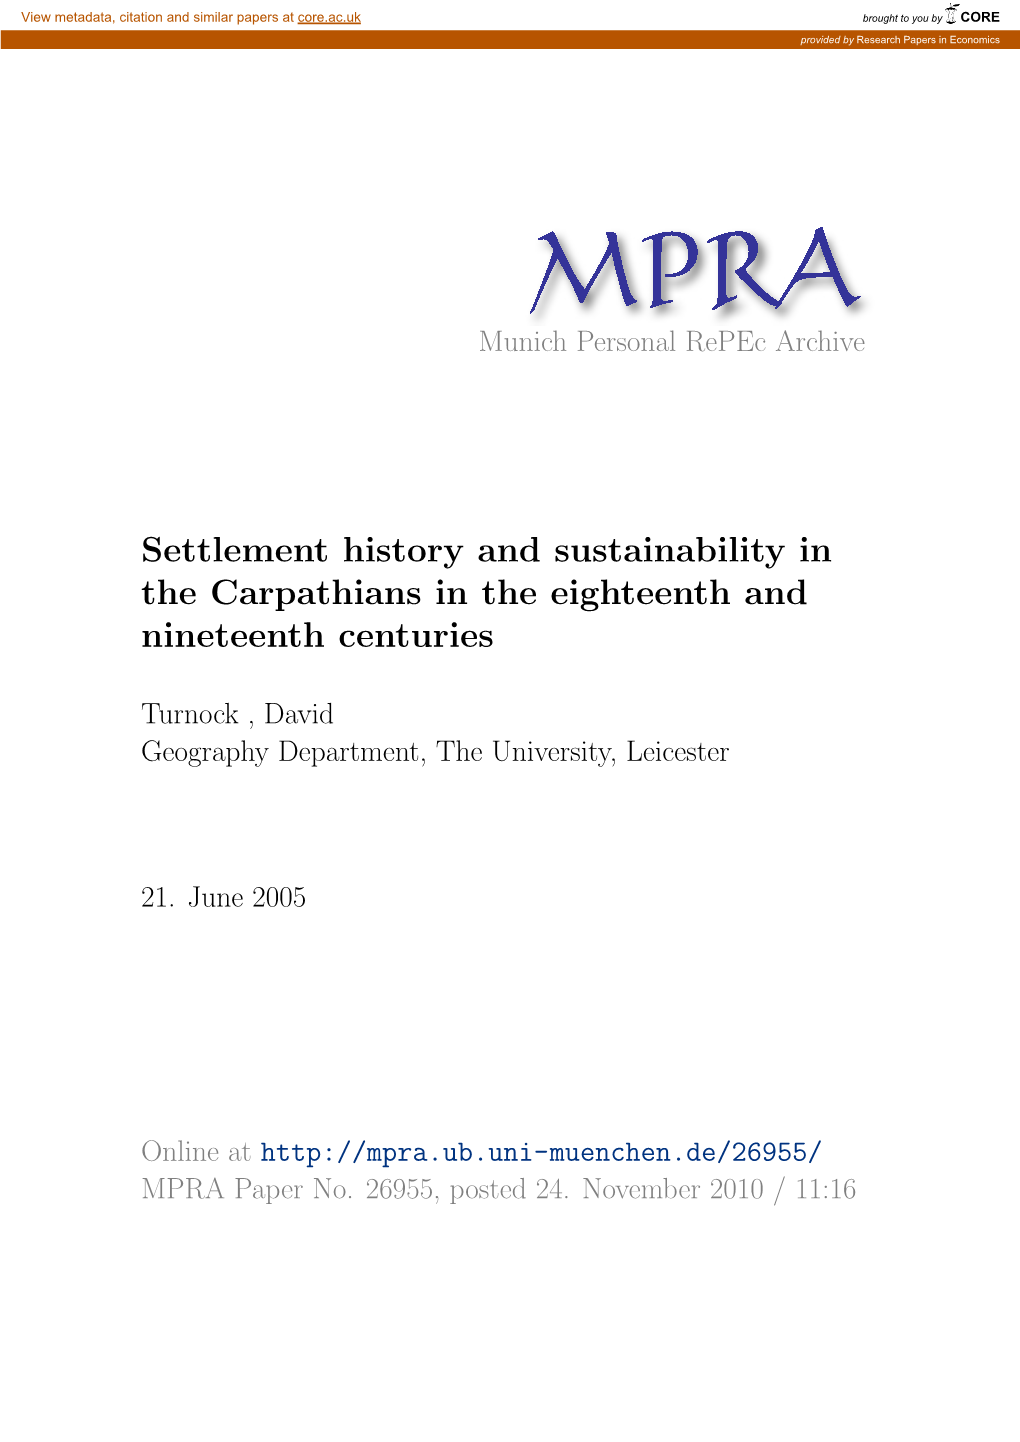 Settlement History and Sustainability in the Carpathians in the Eighteenth and Nineteenth Centuries